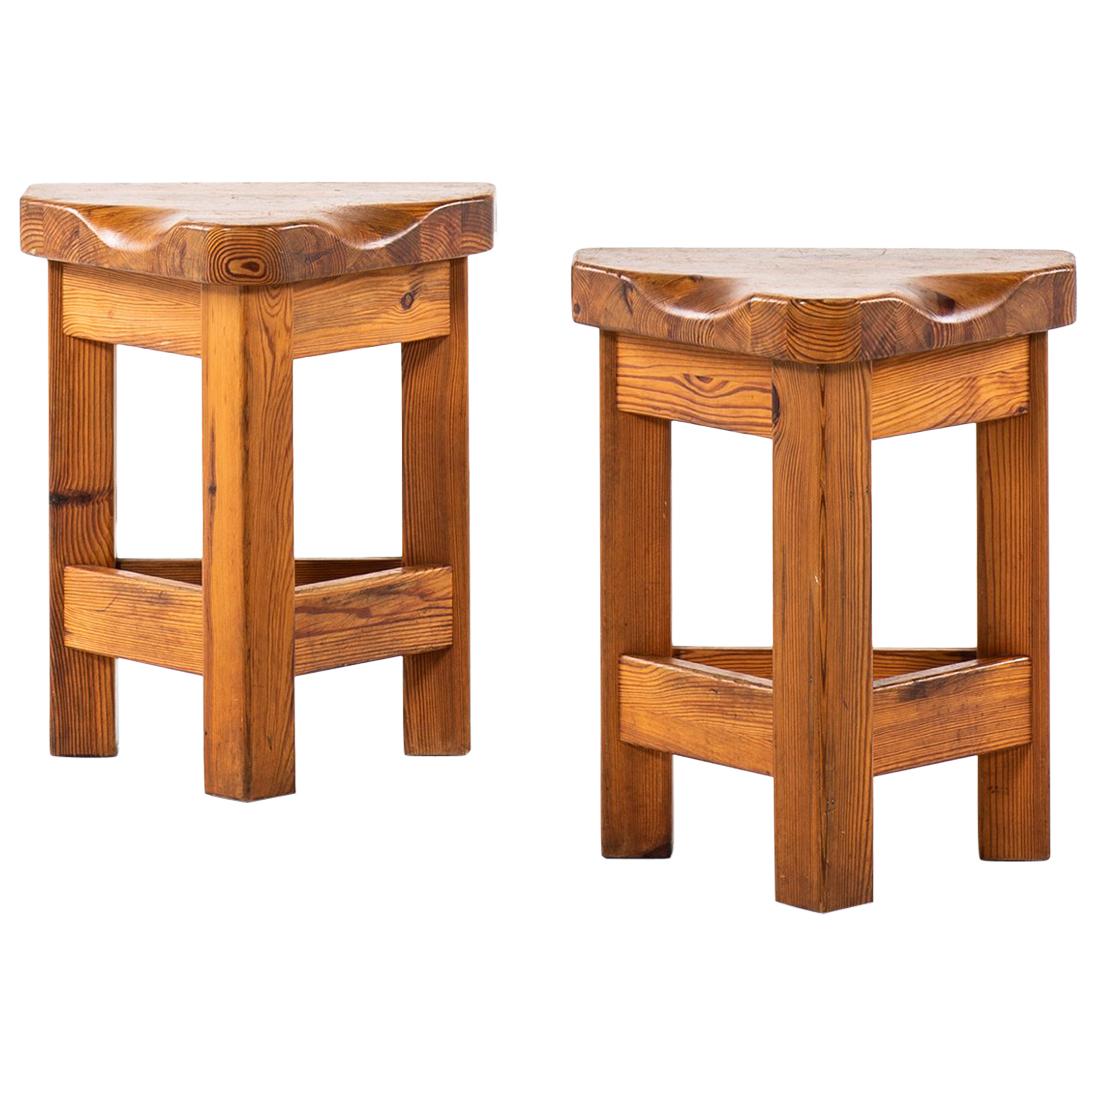 Pair of Stools in the Manner of Roland Wilhelmsson Produced in Sweden